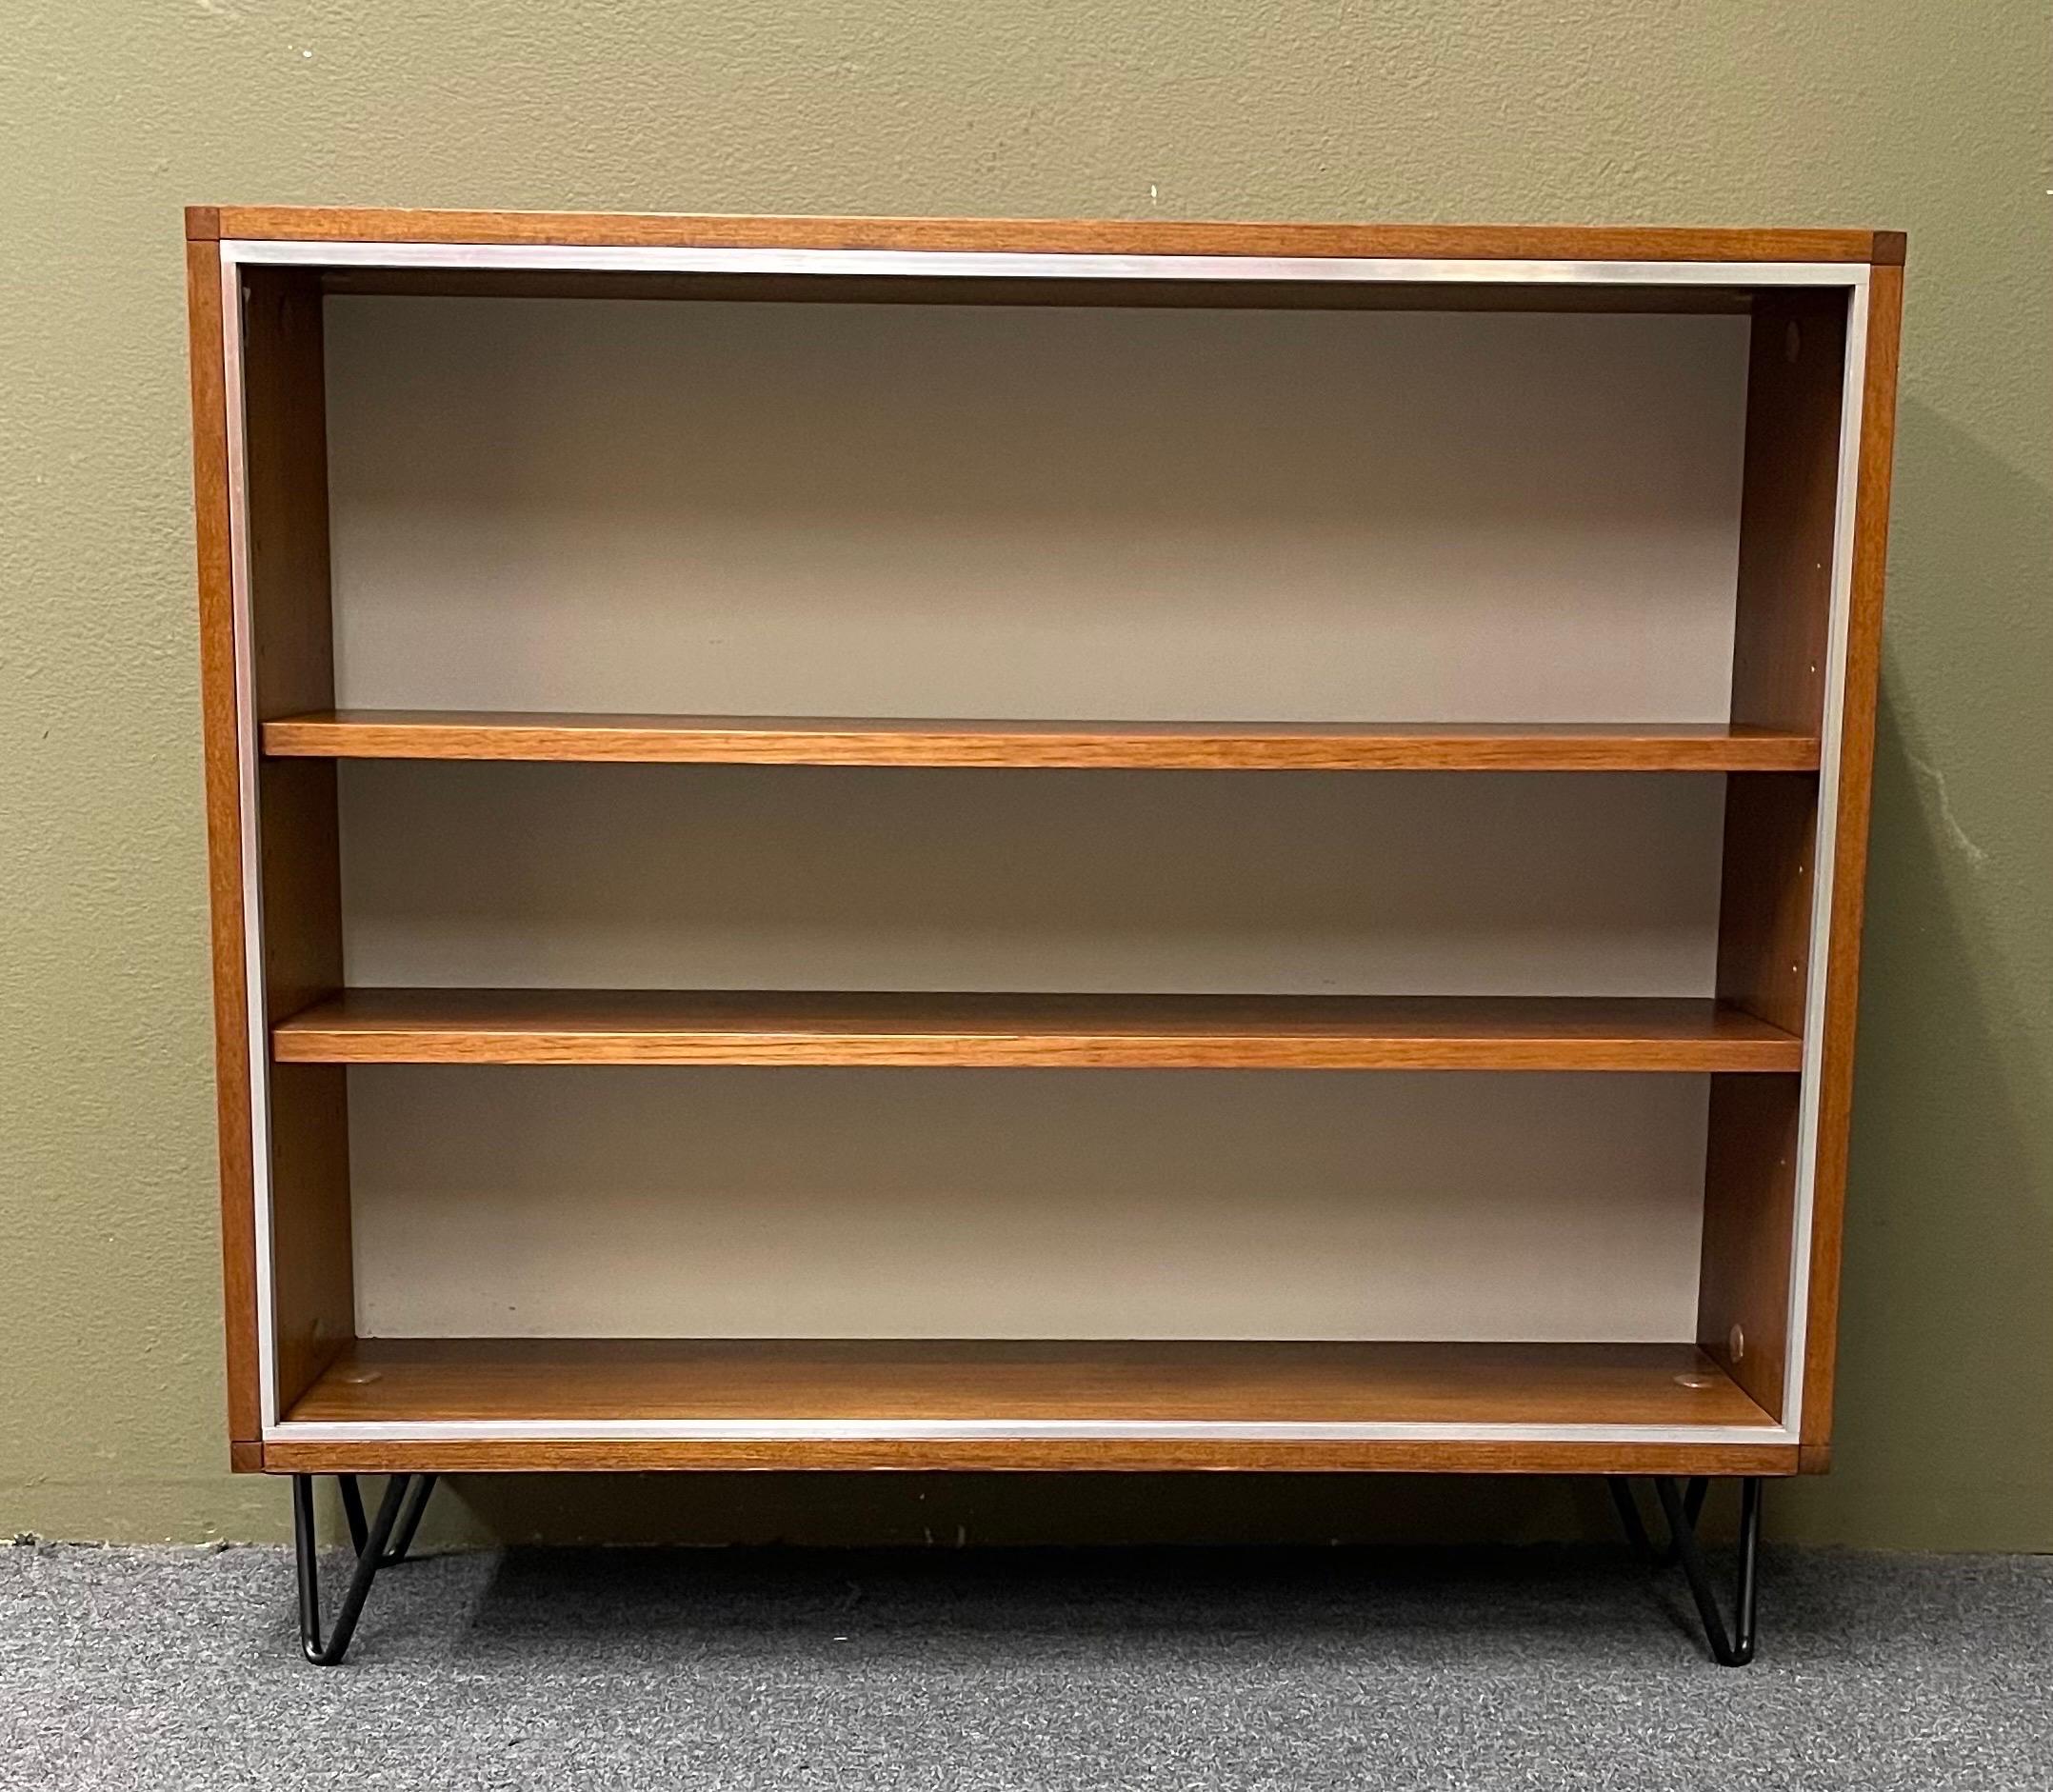 Elegant Danish Modern Bookcase / Cabinet with Glass Doors and Hairpin Legs 1